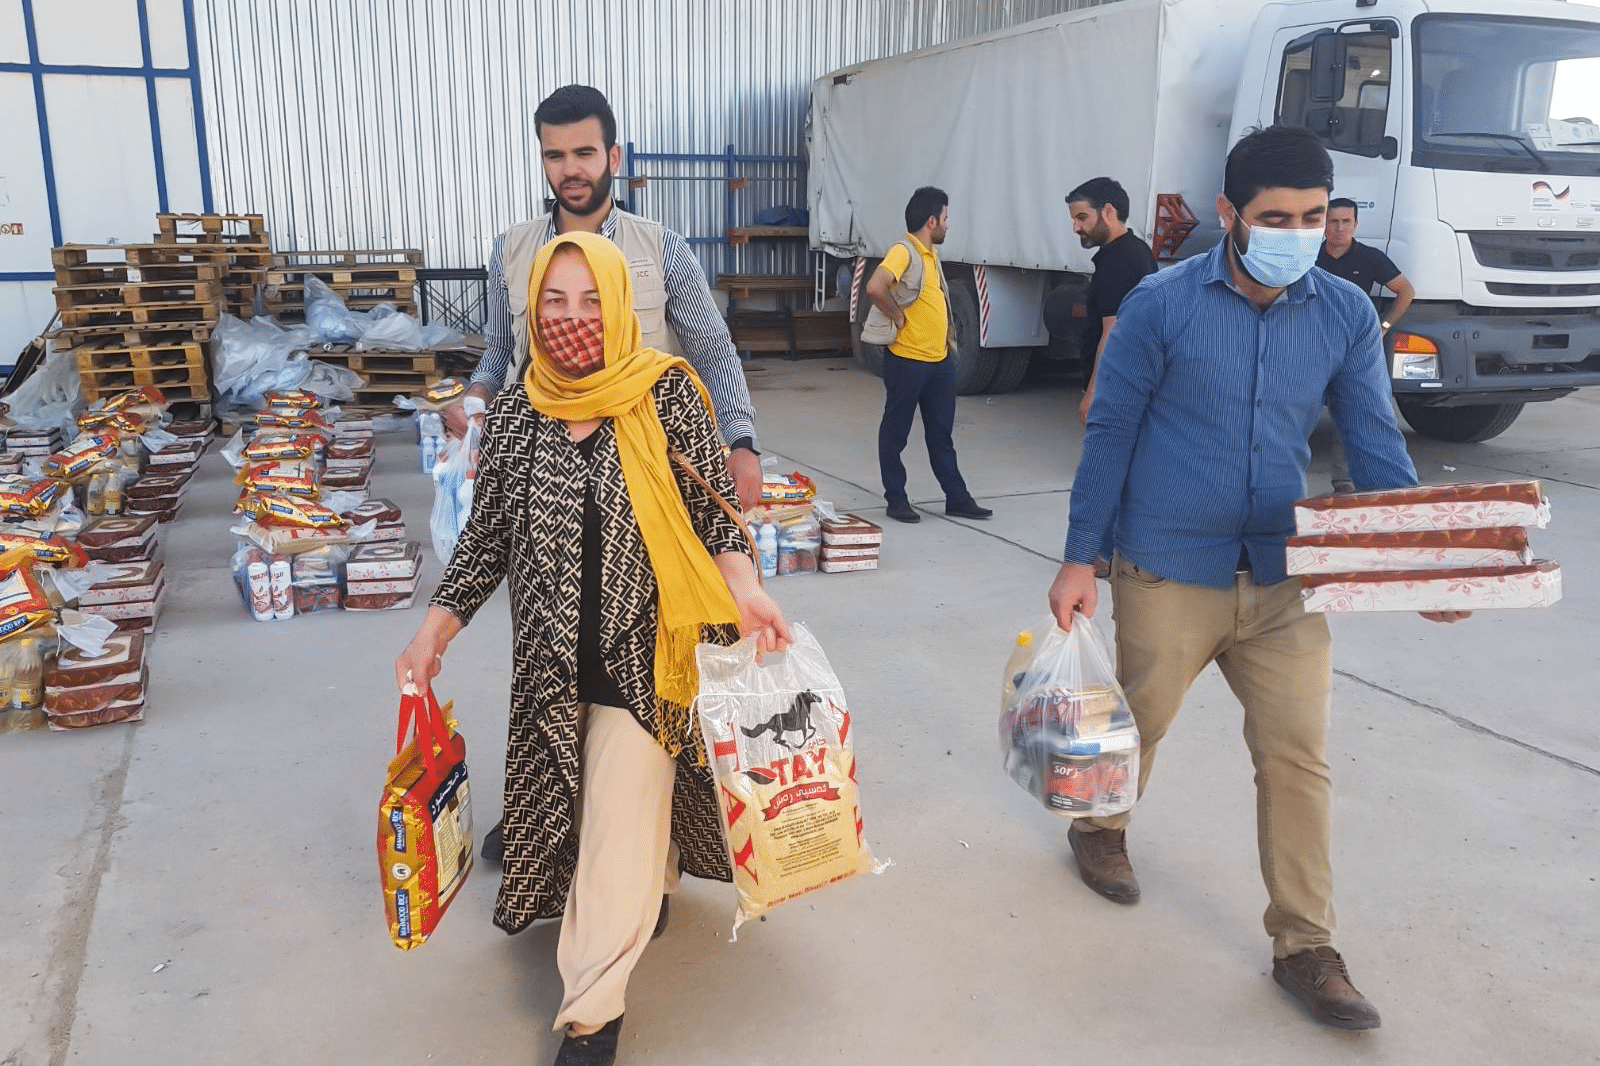 Men and woman carrying food package